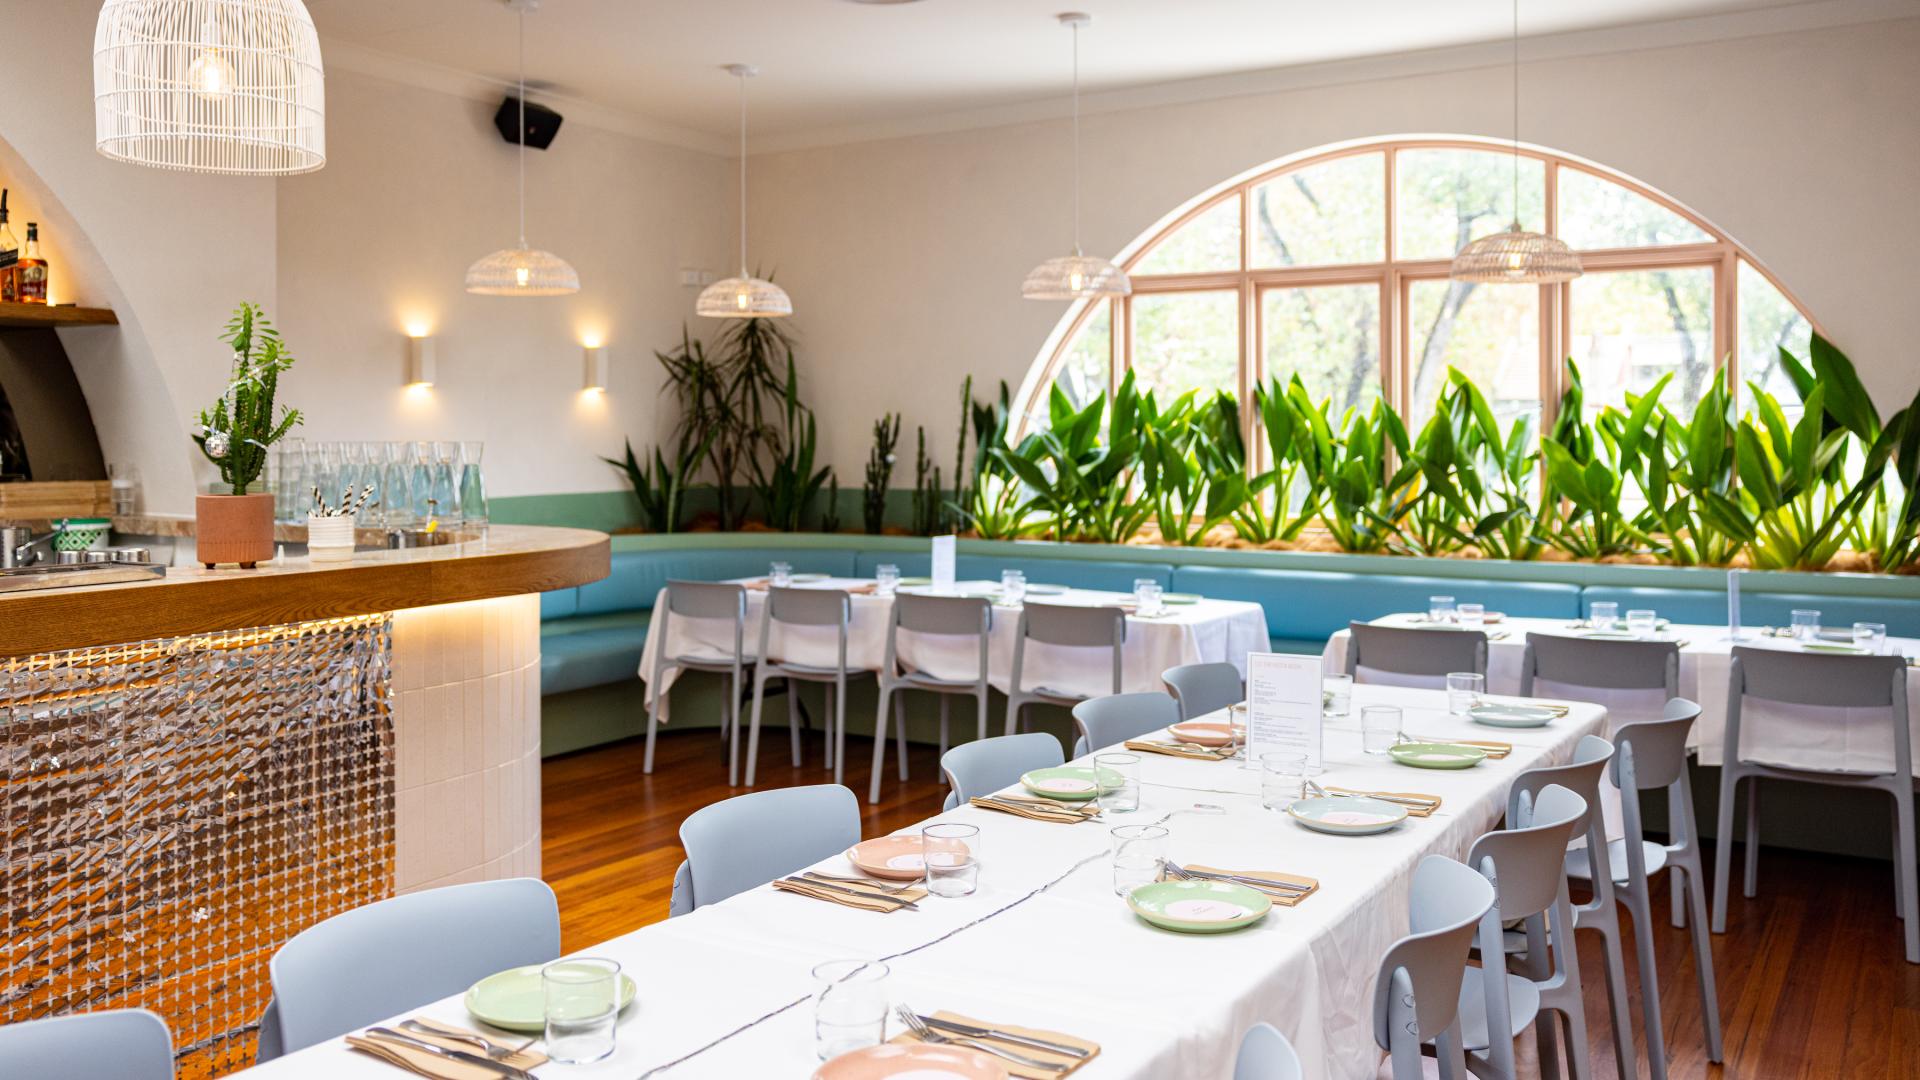 Restaurants with Function Rooms for Hire in Sydney